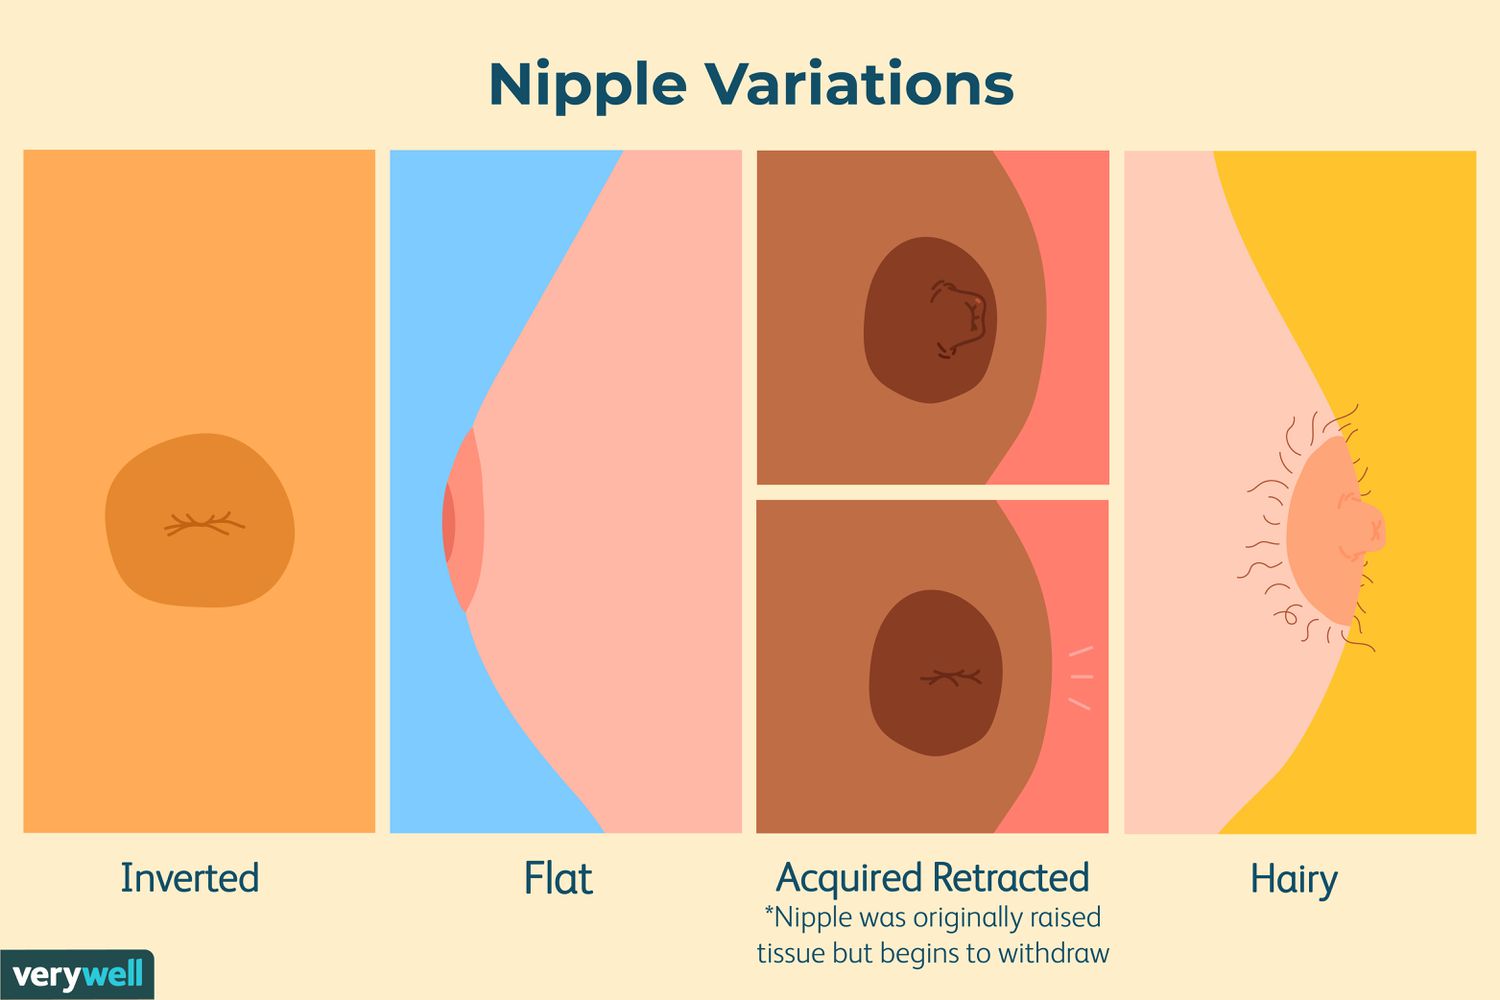 Types of Nipples: Protruding, Flat, Inverted, Unclassified